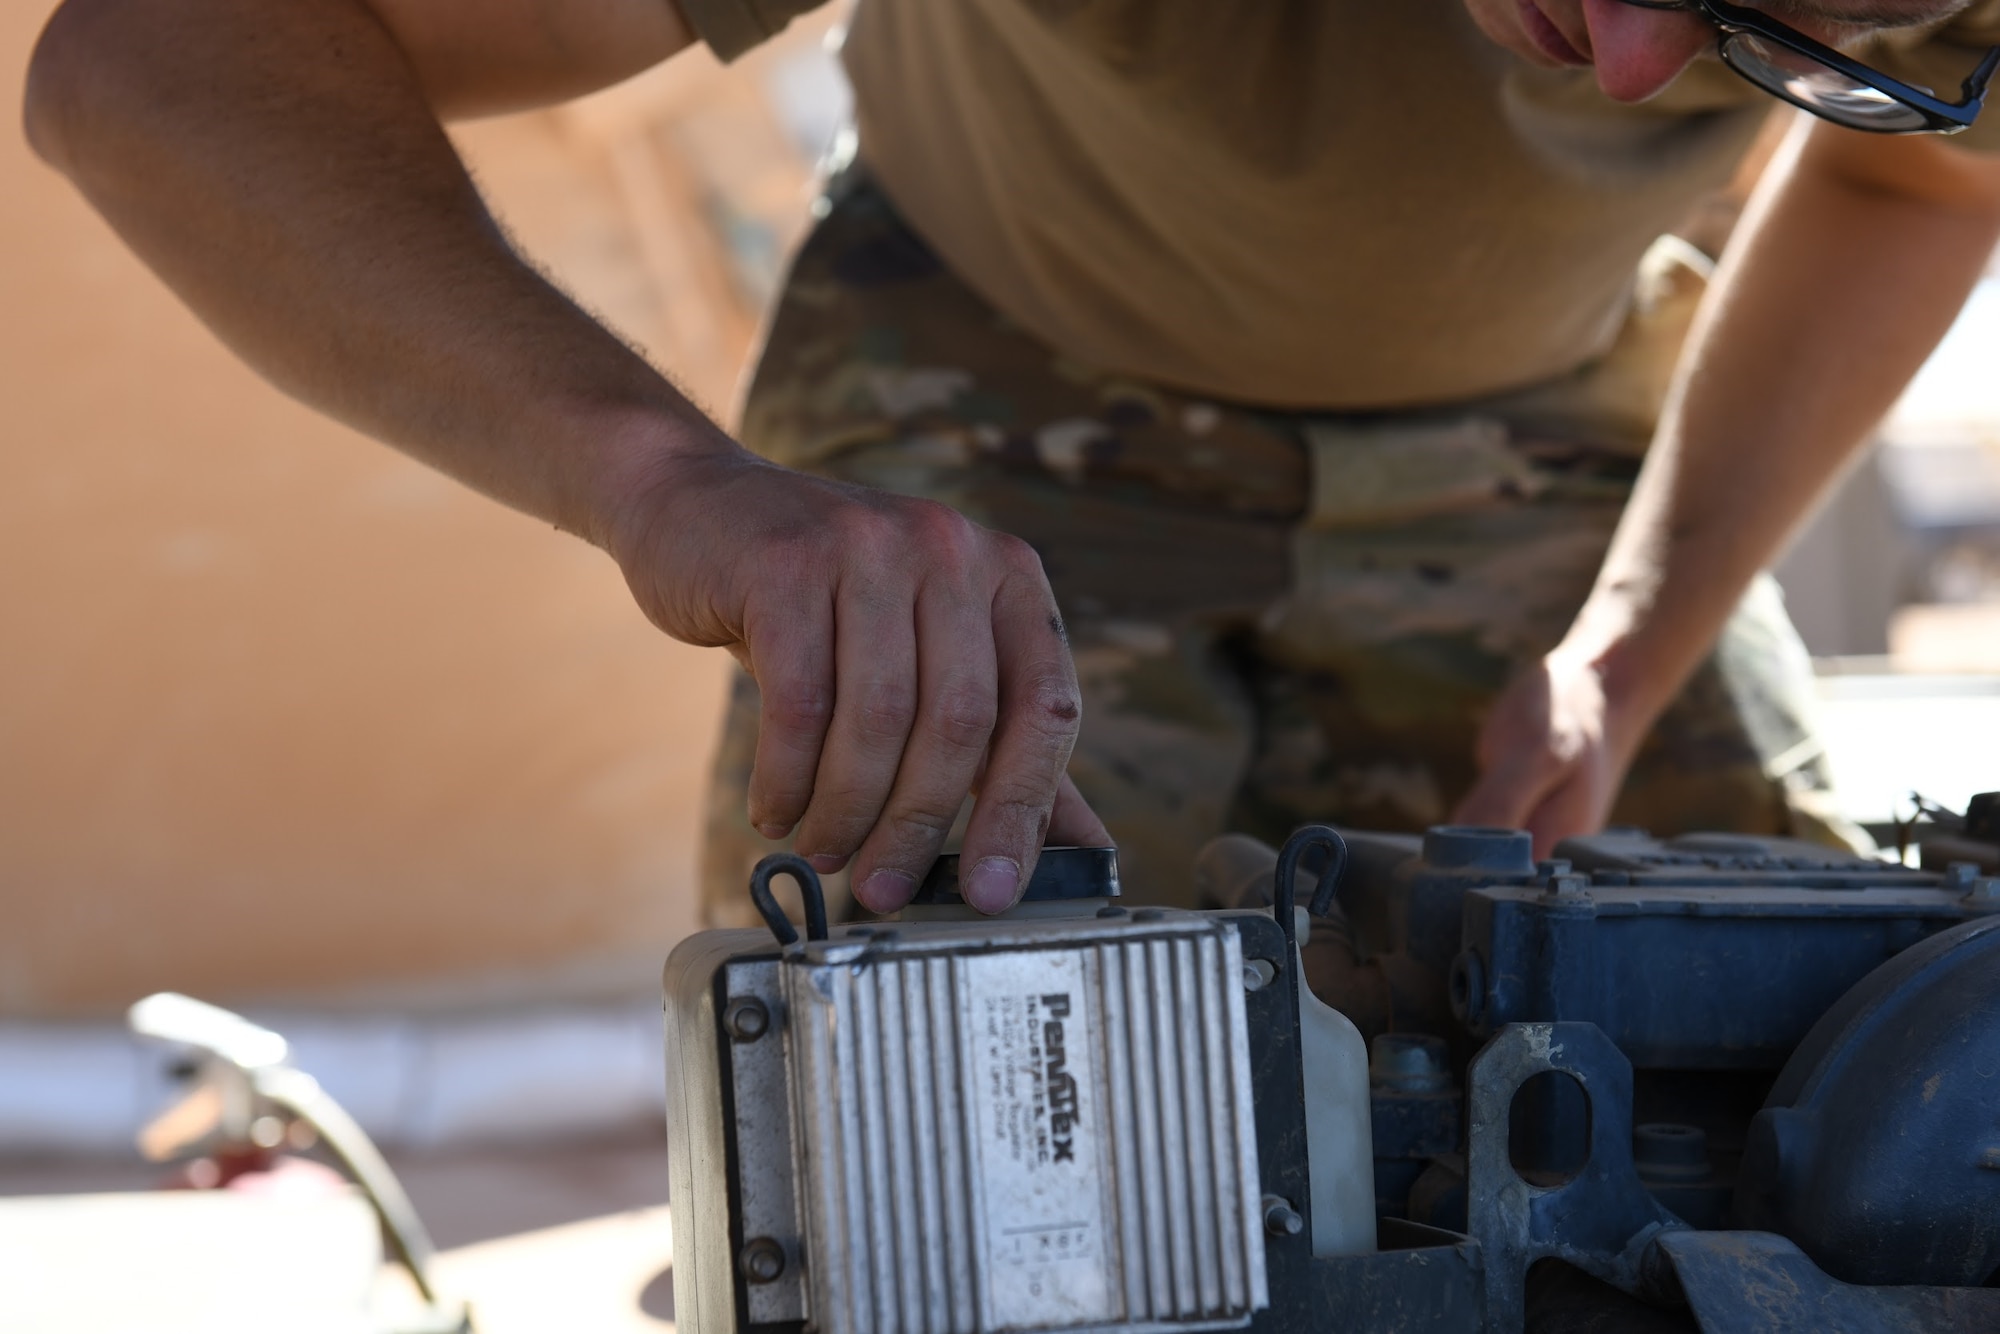 U.S. Air Force Senior Airman Ryan Davis, 724th Expeditionary Air Base Squadron air terminal operations center journeyman, replaces a cap after putting oil into a Halvorsen 25K-Loader, at Nigerien AB 201, Agadez, Niger, Jan 4, 2021. ATOC’s mission is that each plane is handled quickly and safely. (U.S. Air Force photo by Senior Airman Gabrielle Winn